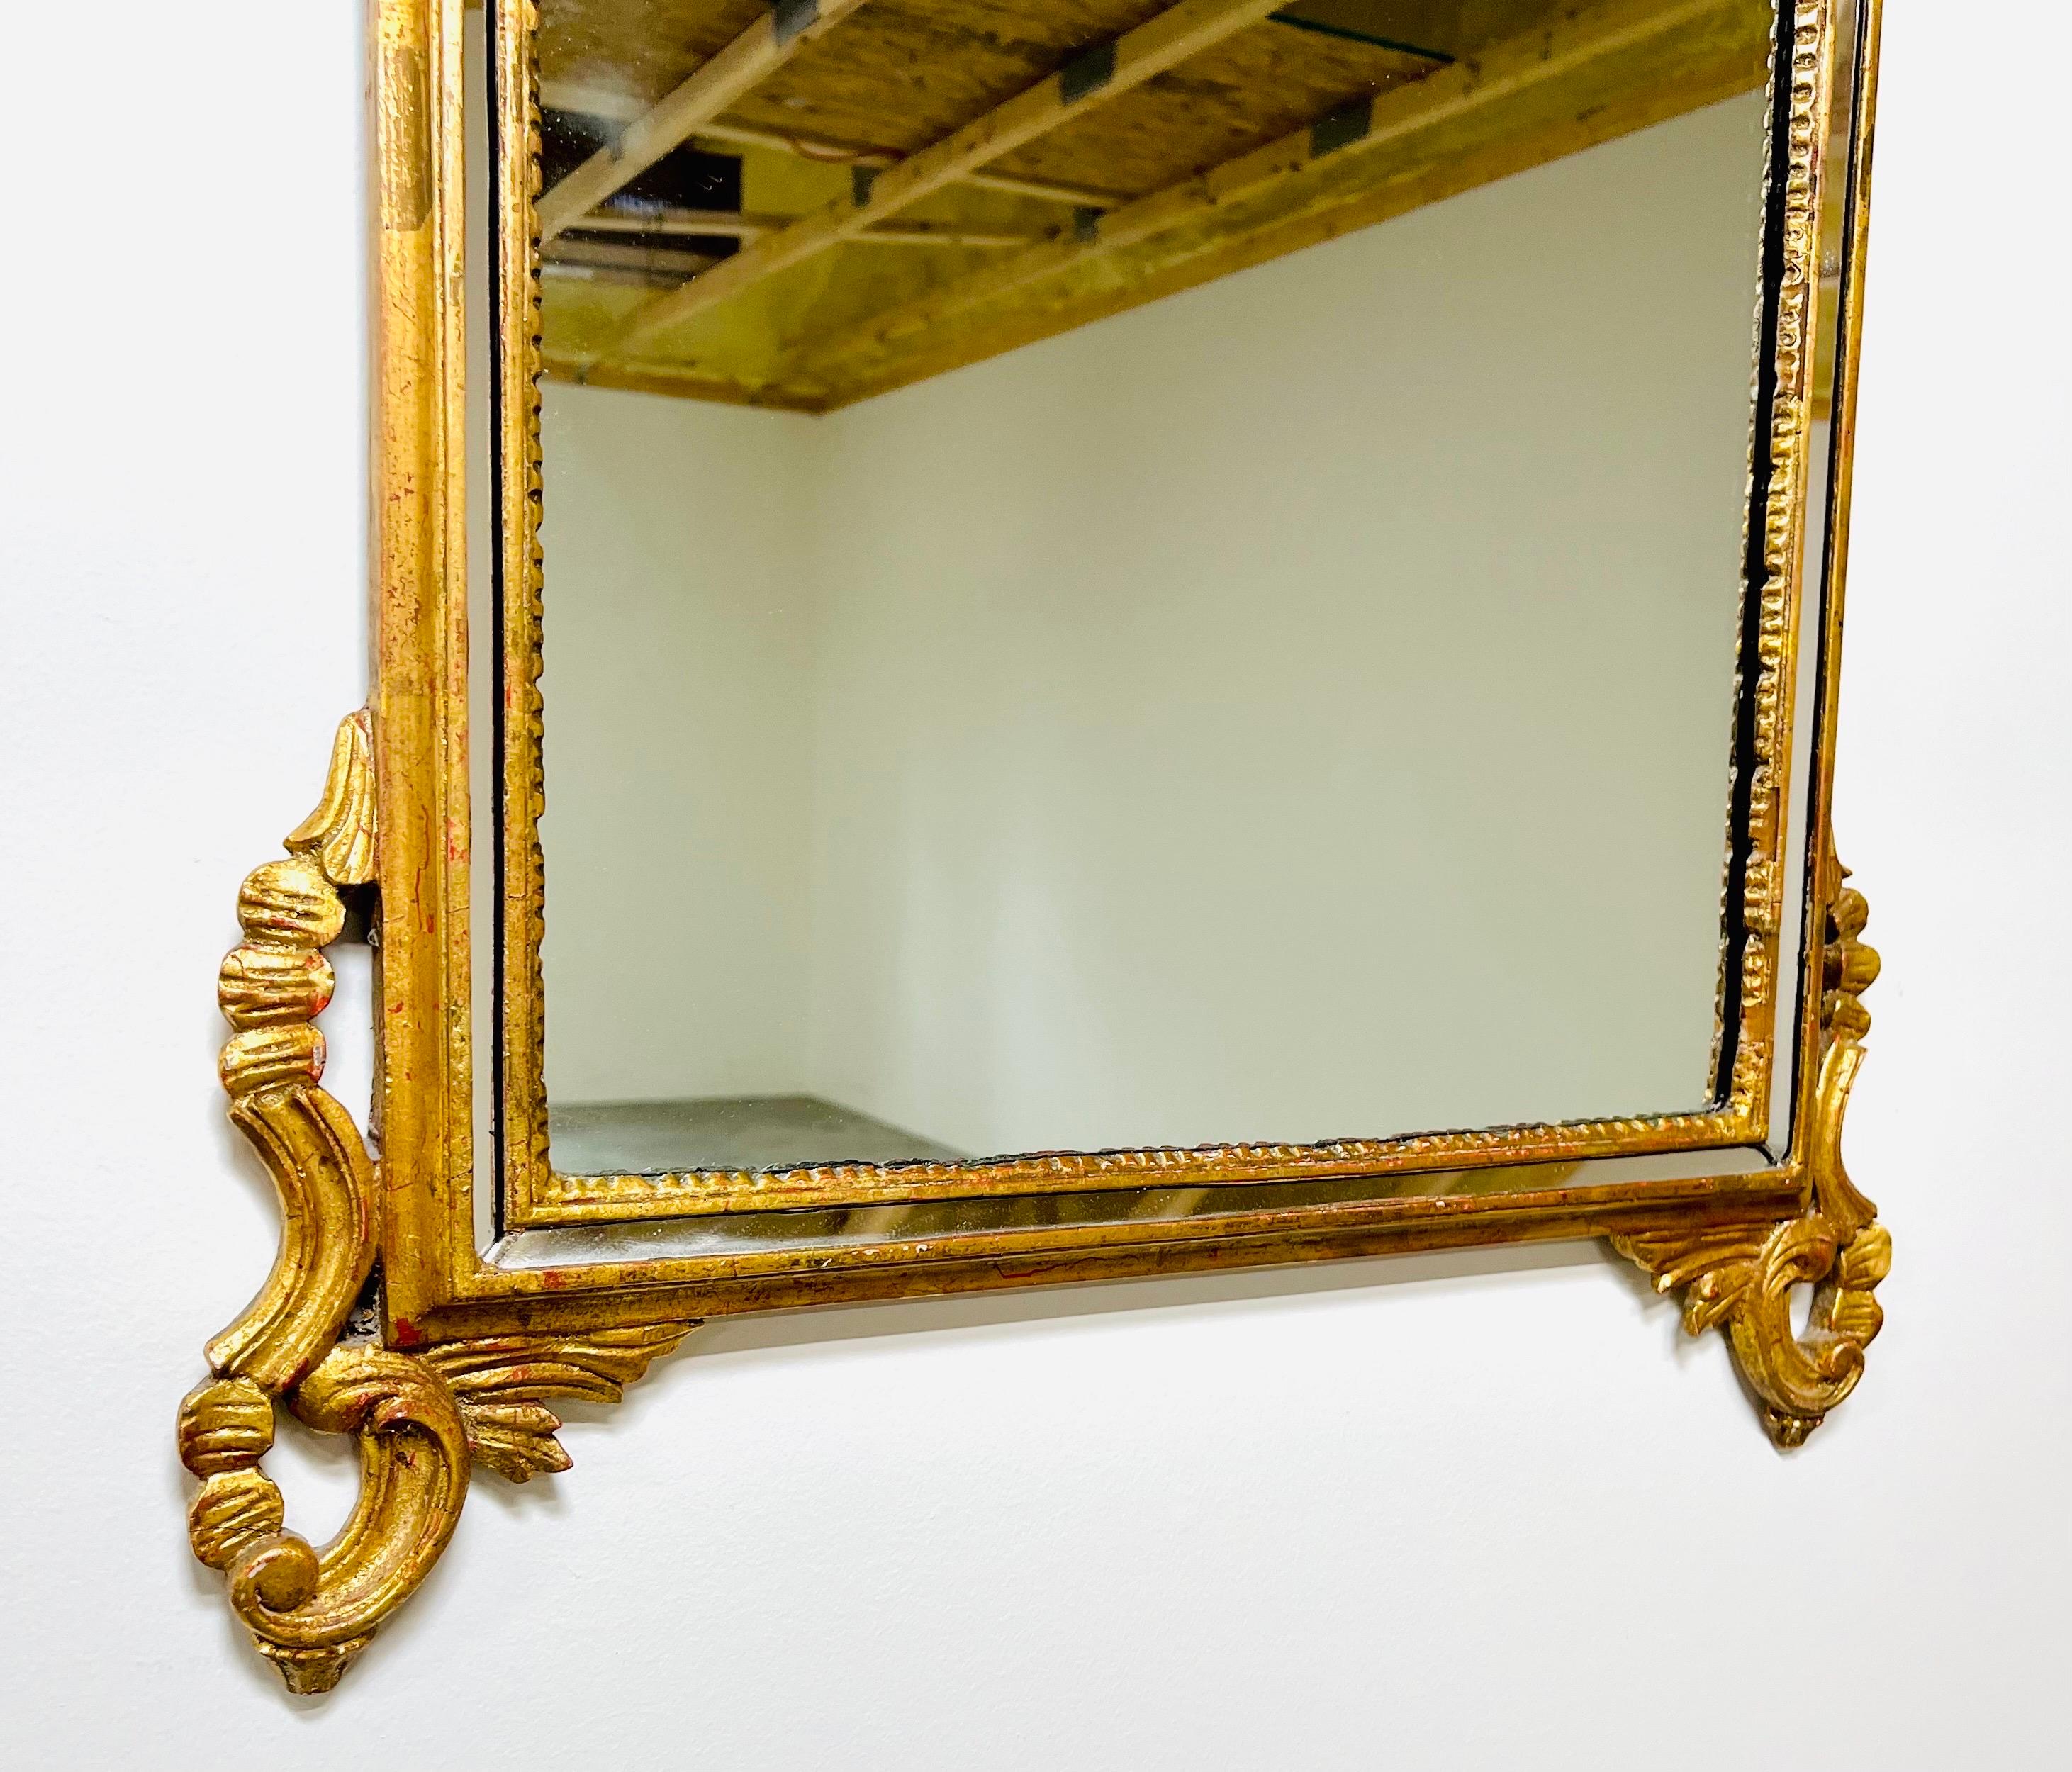 American 18th Century Style Regency Gold Gilt Wall Mirror Having Urn and Wreathed Pendant